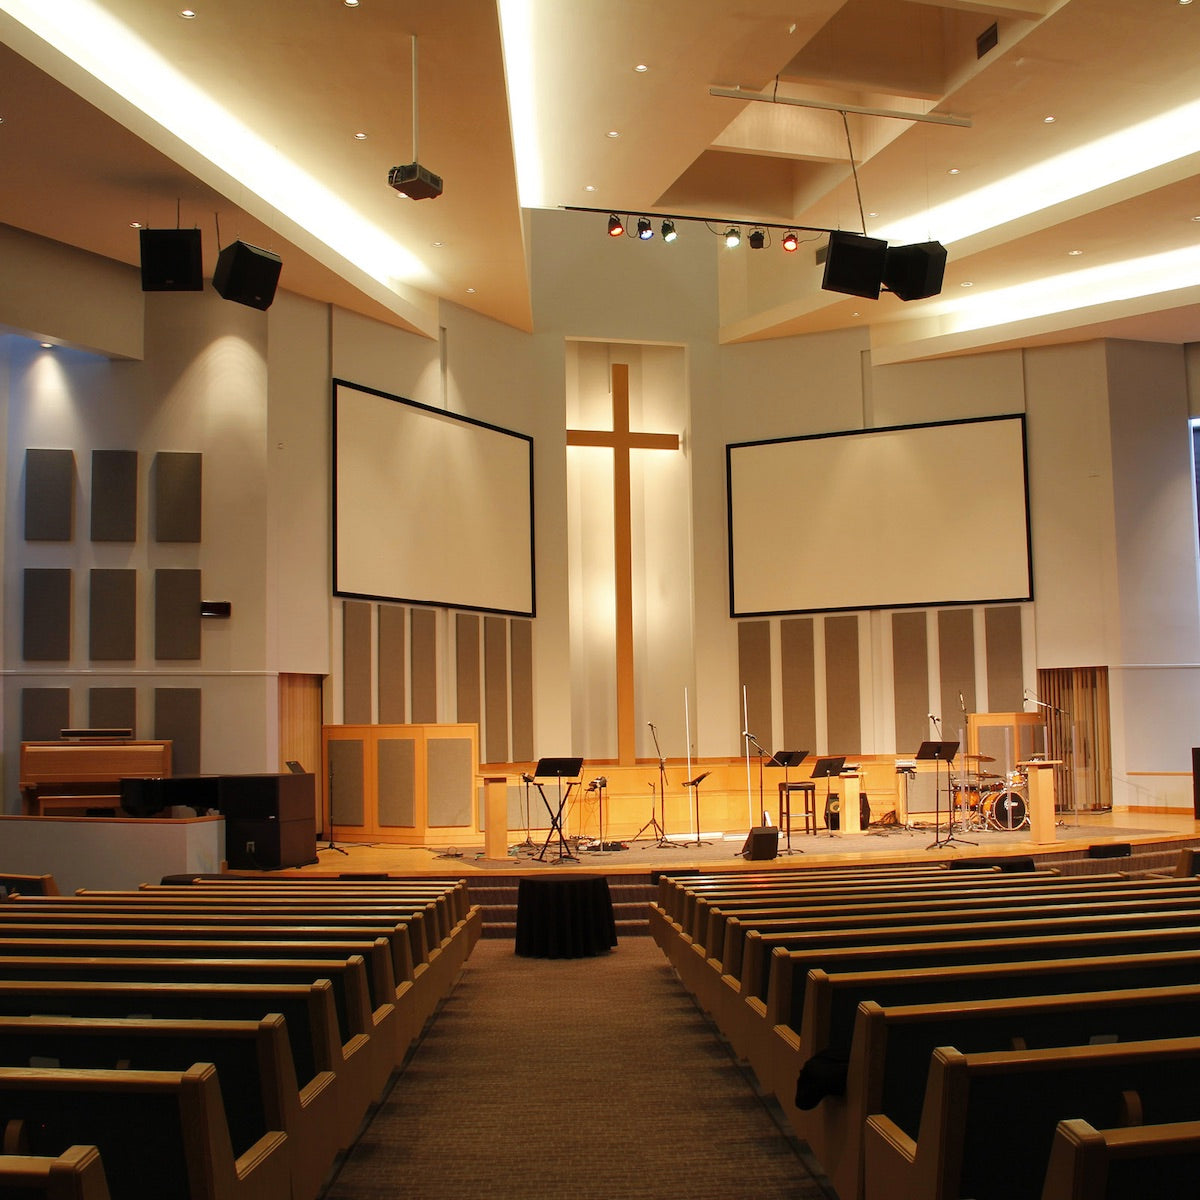 Primacoustic Broadway Wall Panels - Control Columns, installed in a House of Worship